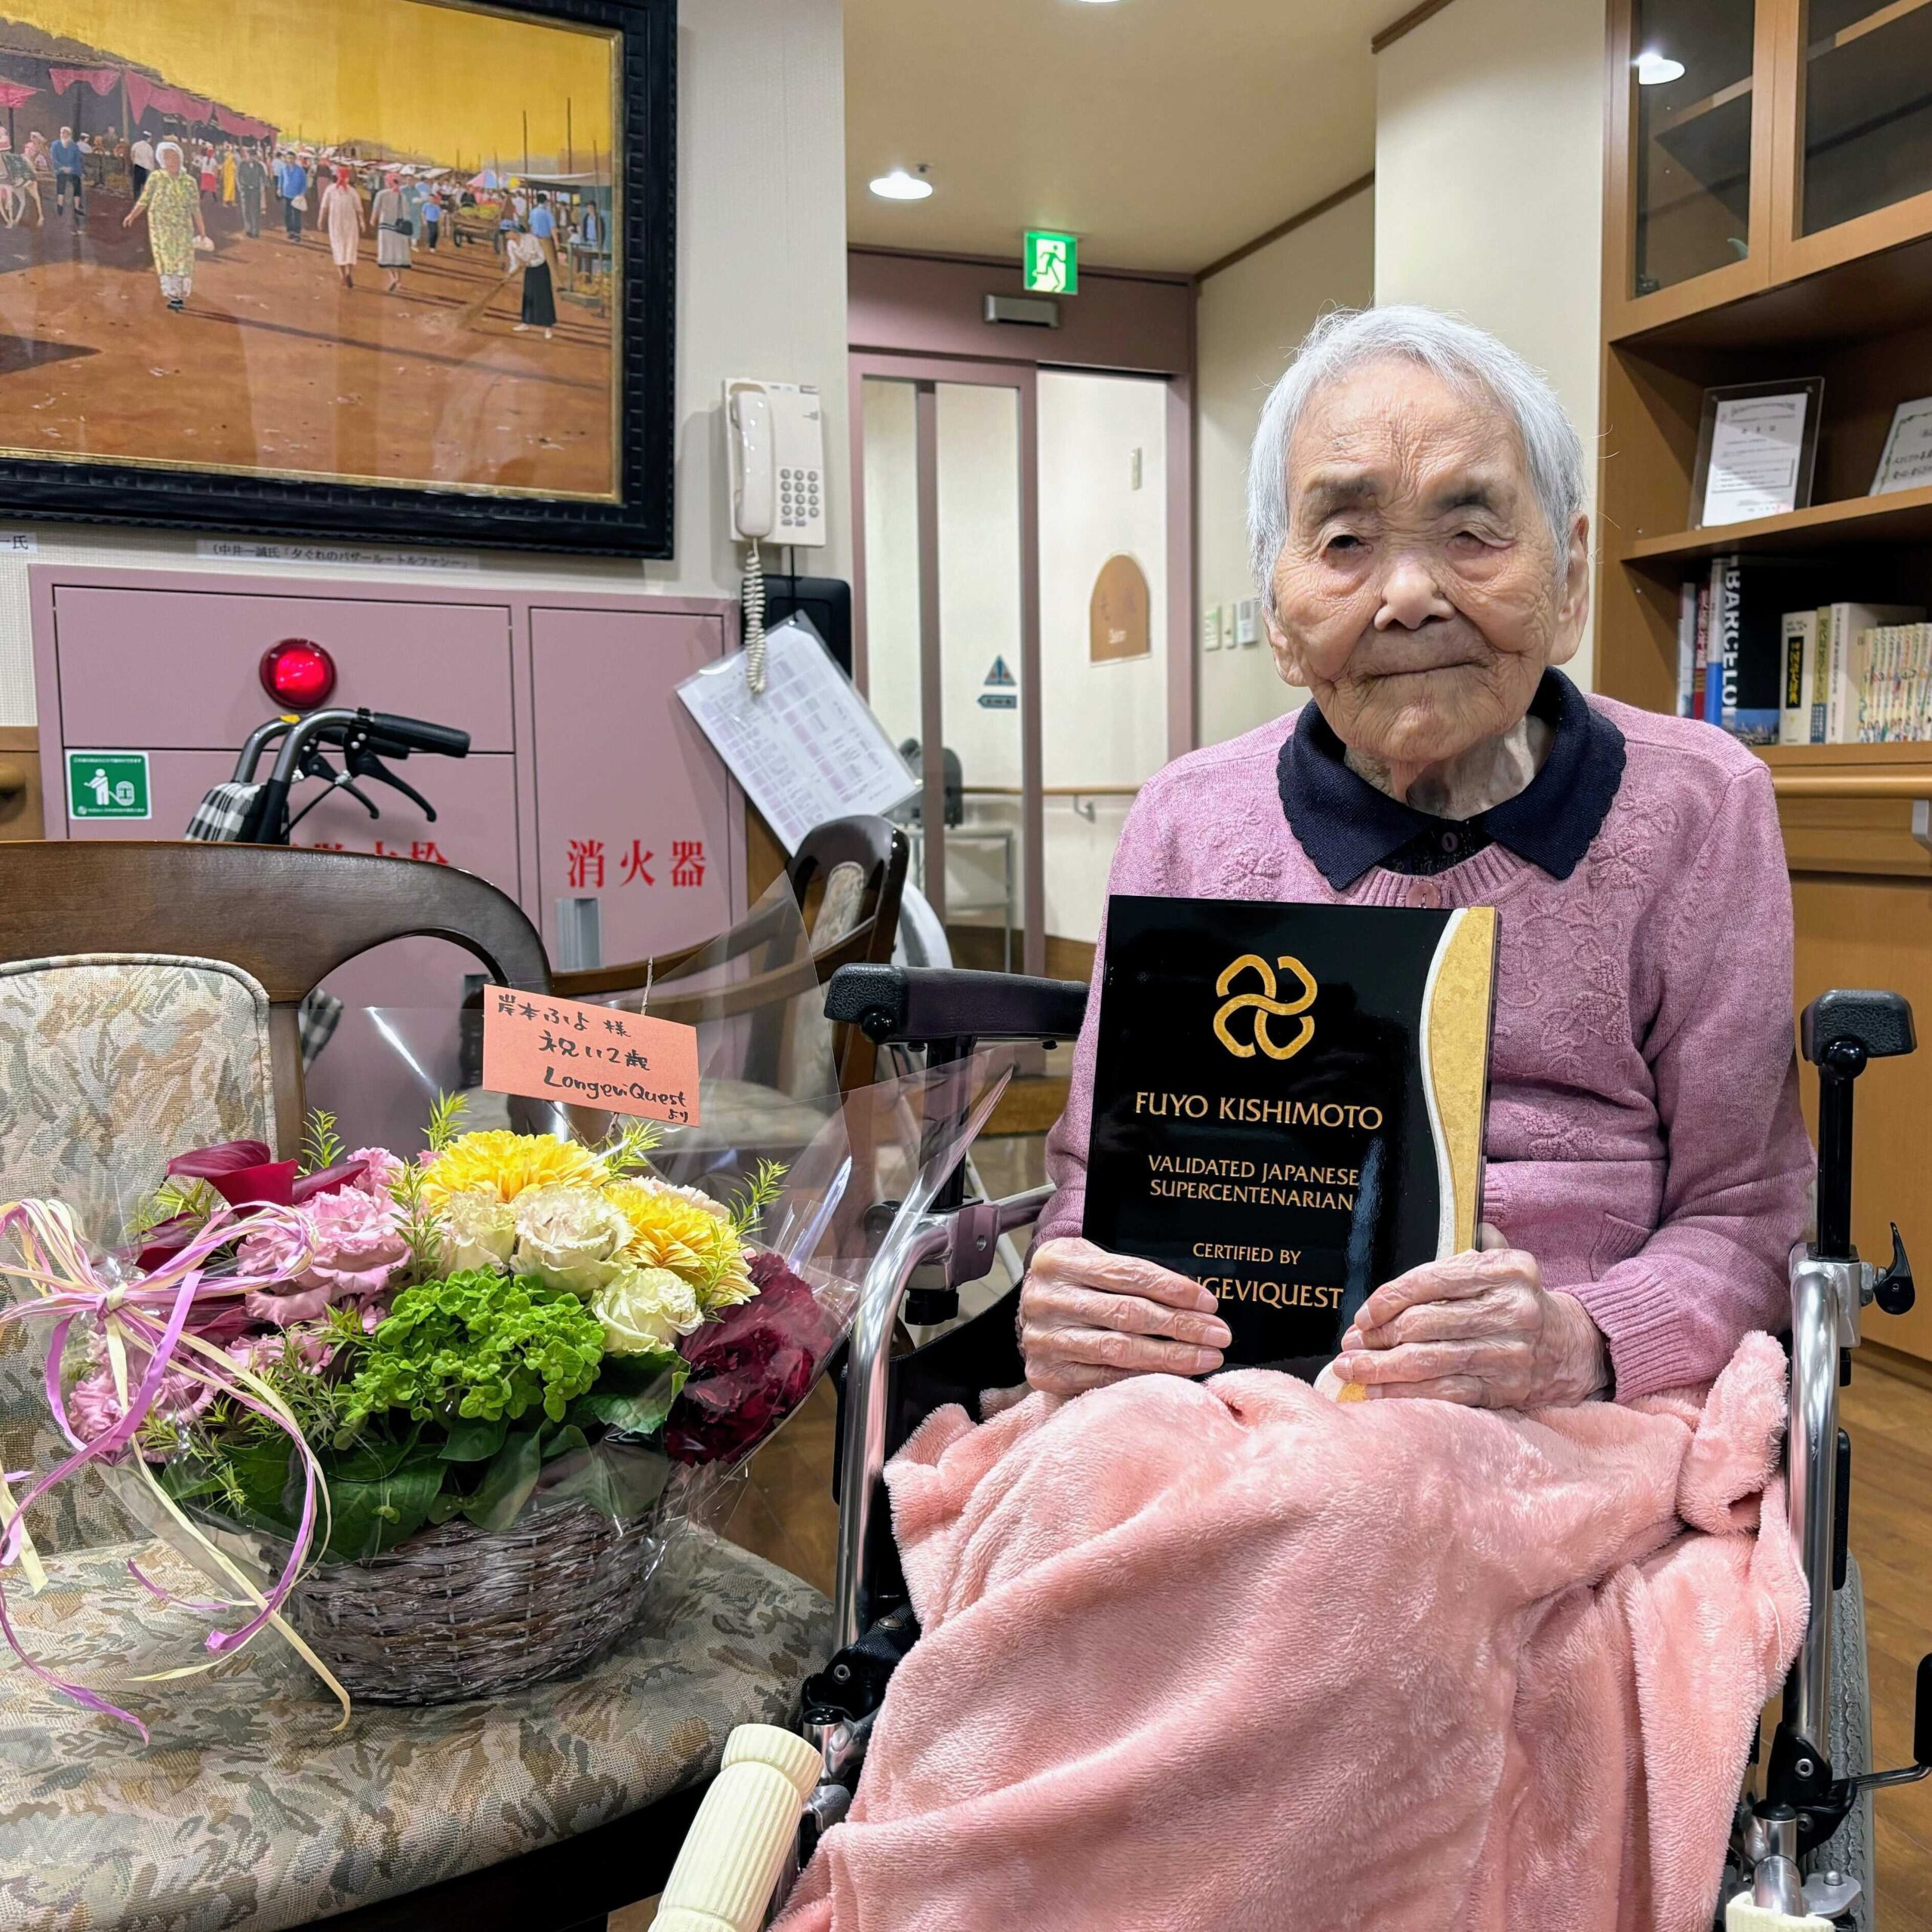 Mrs. Kishimoto was presented with a plaque and a flower basket celebrating her status as a verified supercentenarian.